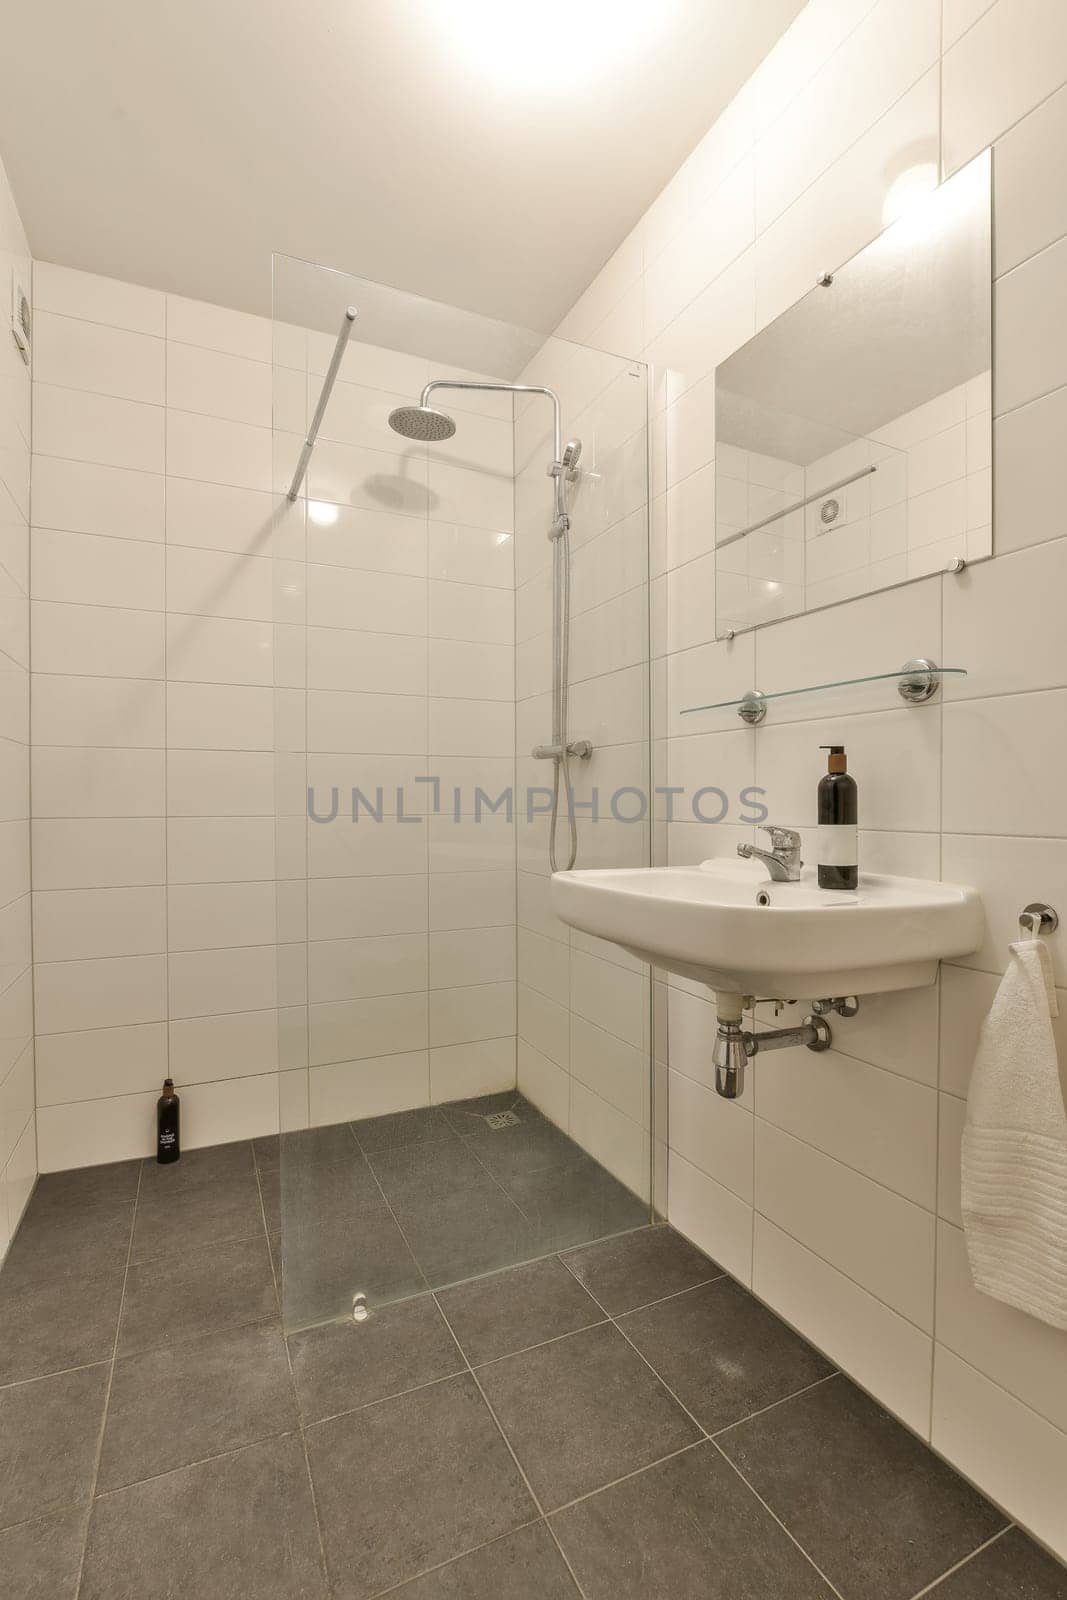 a bathroom with a sink, mirror and shower head mounted on the wall next to it is a towel rack